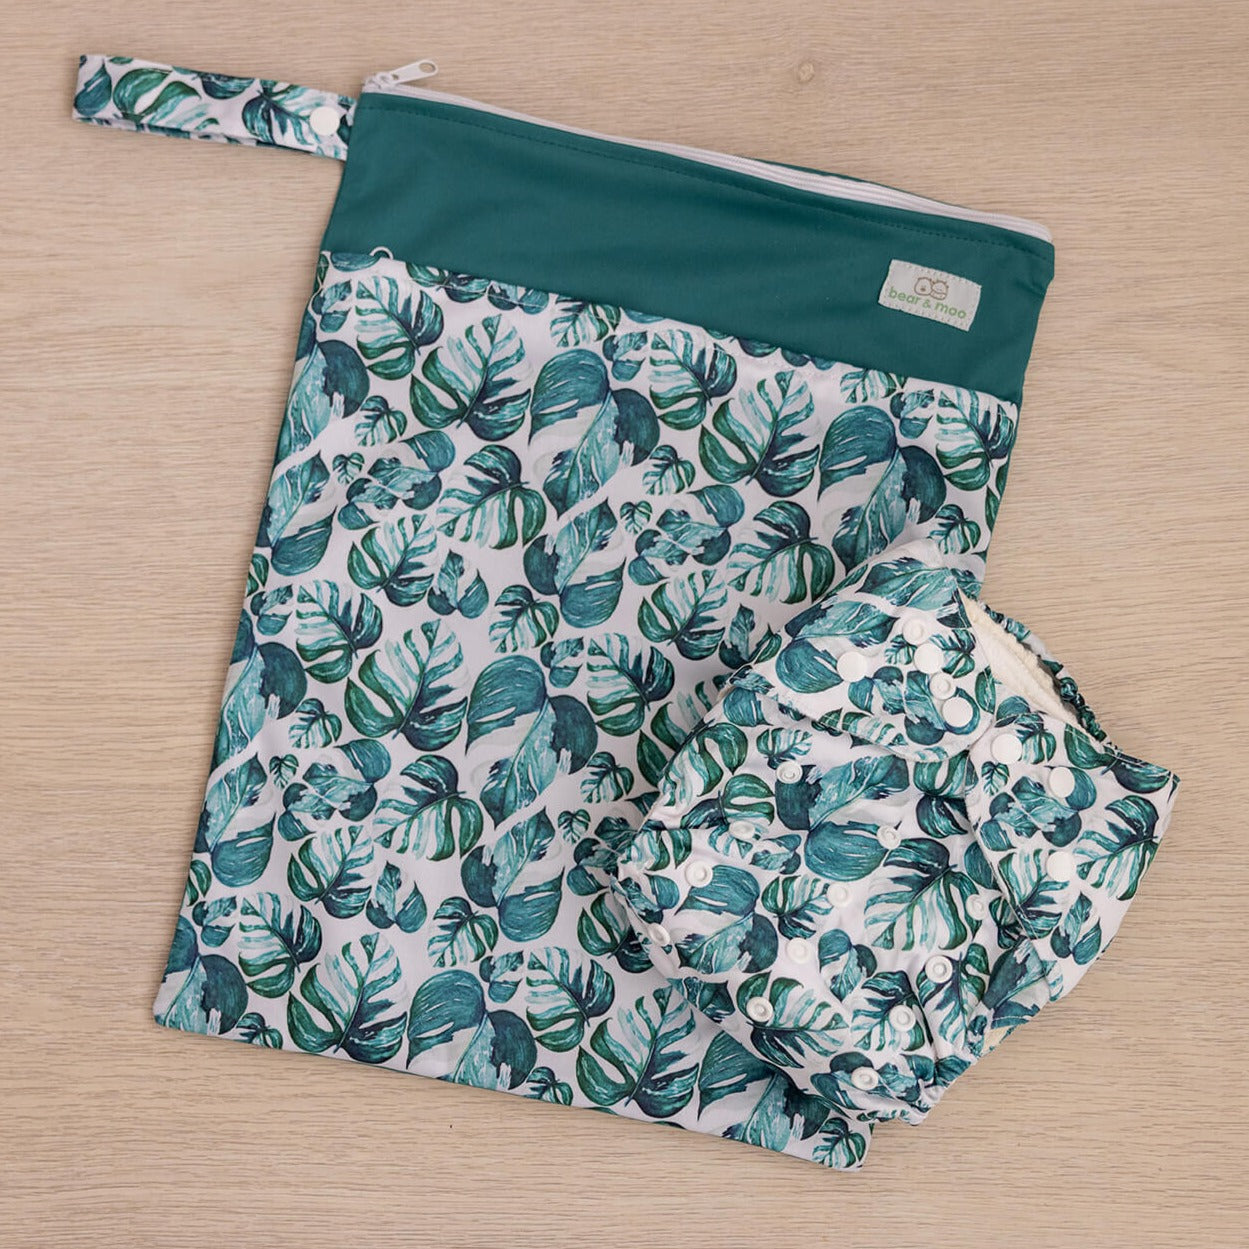 Bear & Moo Reusable Cloth Nappy in Monstera print with Large Reusable Waterproof Wet Bag